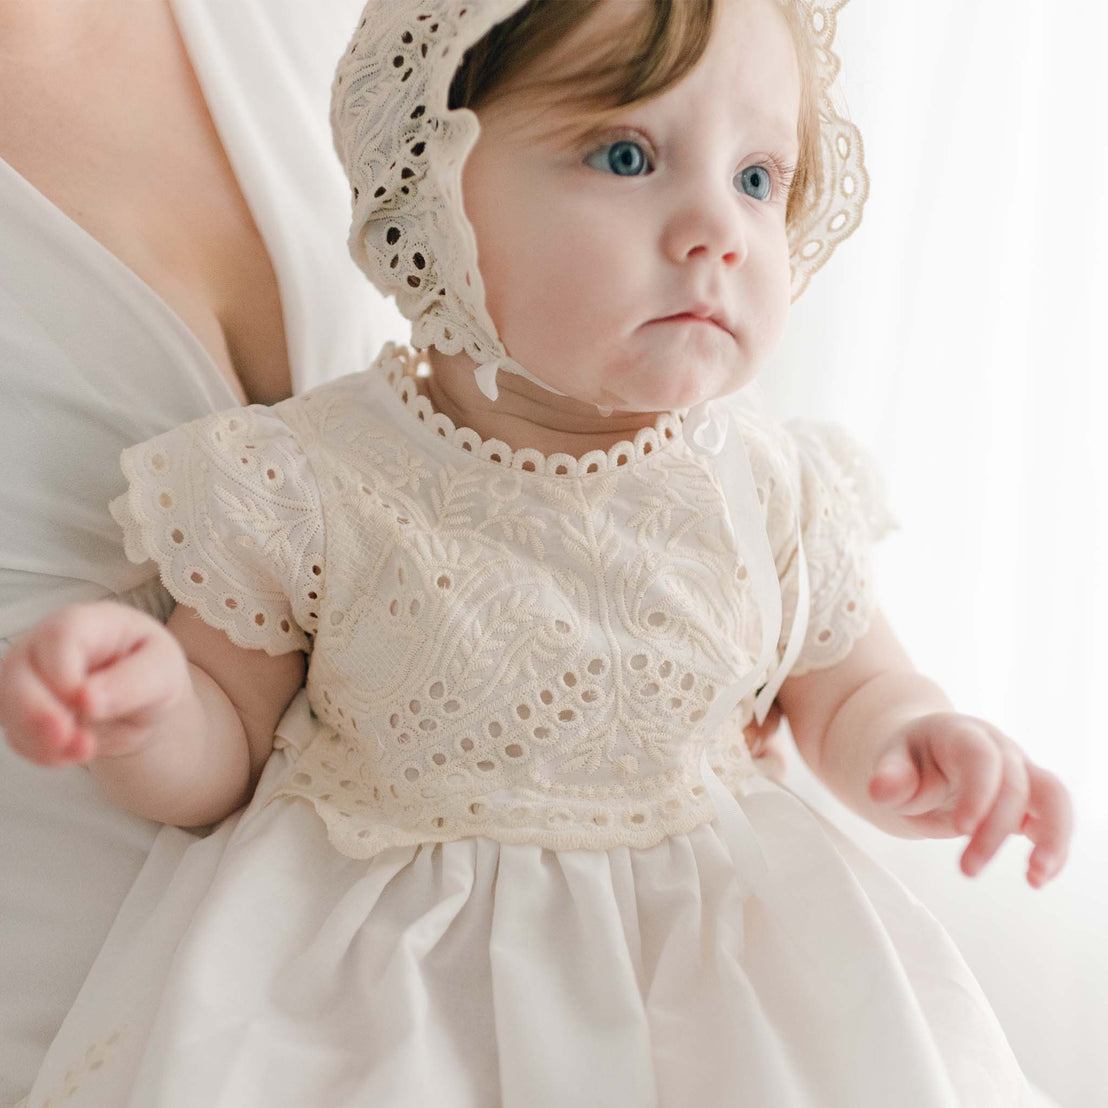 Baby wearing an Ingrid cotton blessing gown in light ivory and a bonnet